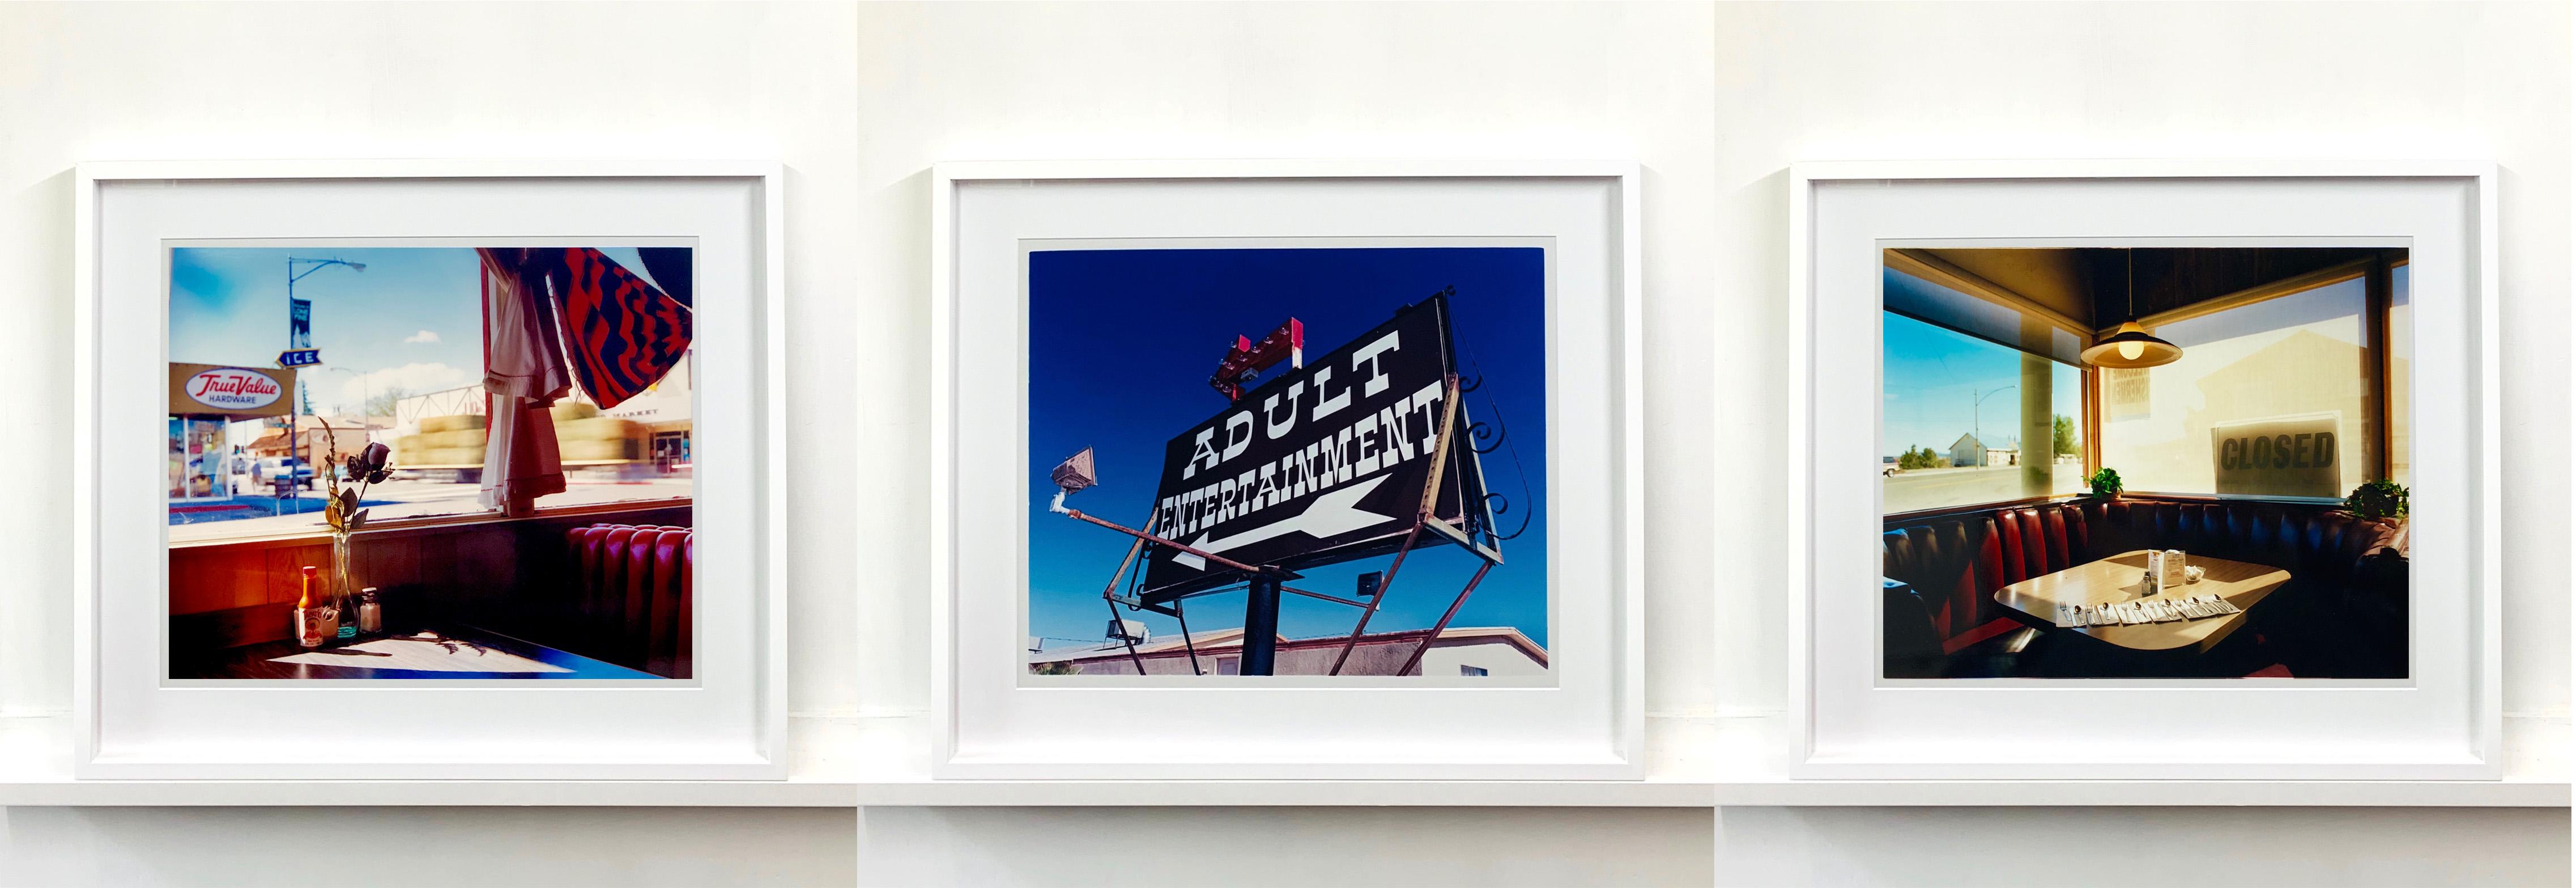 Part of Richard Heeps 'Dream in Colour' Series, 'Nicely's Café' has a vibe of an American road trip, the classic diner interior has a cool cinematic feel.

This artwork is a limited edition of 25, gloss photographic print, dry-mounted to aluminium,